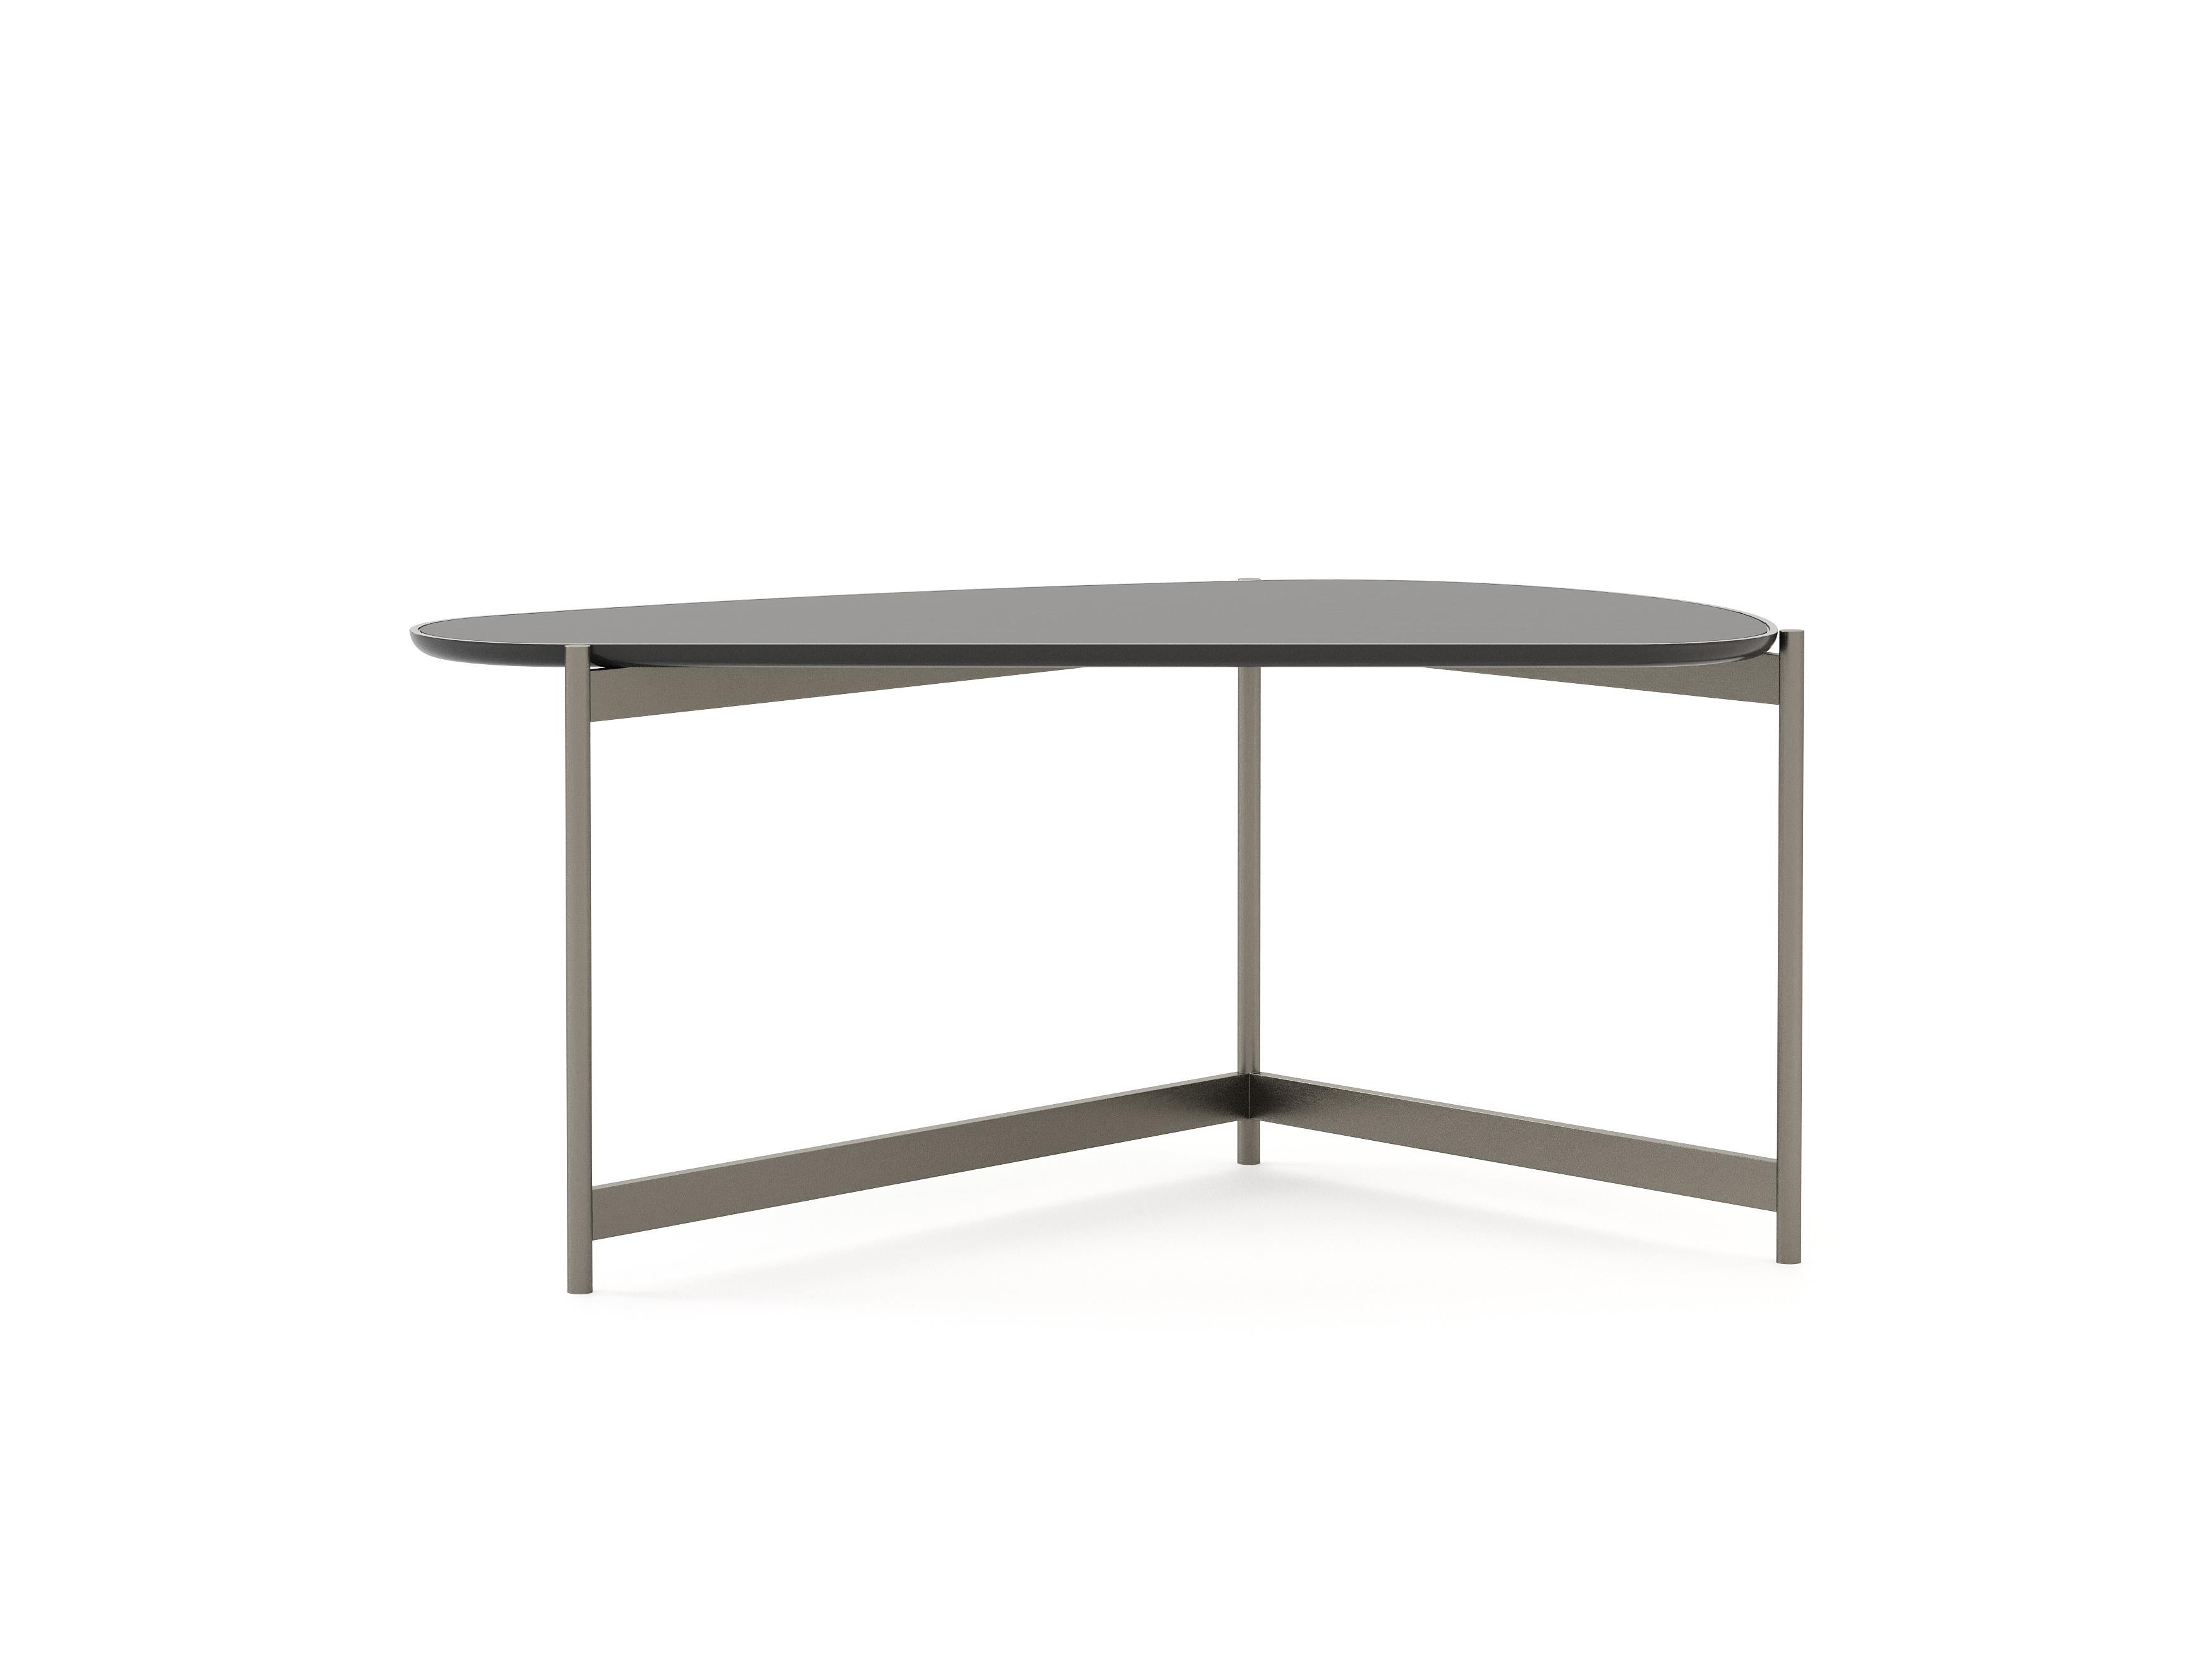 Portuguese Modern Capri Desk Made with Ebony and Bronzed Iron, Handmade by Stylish Club For Sale